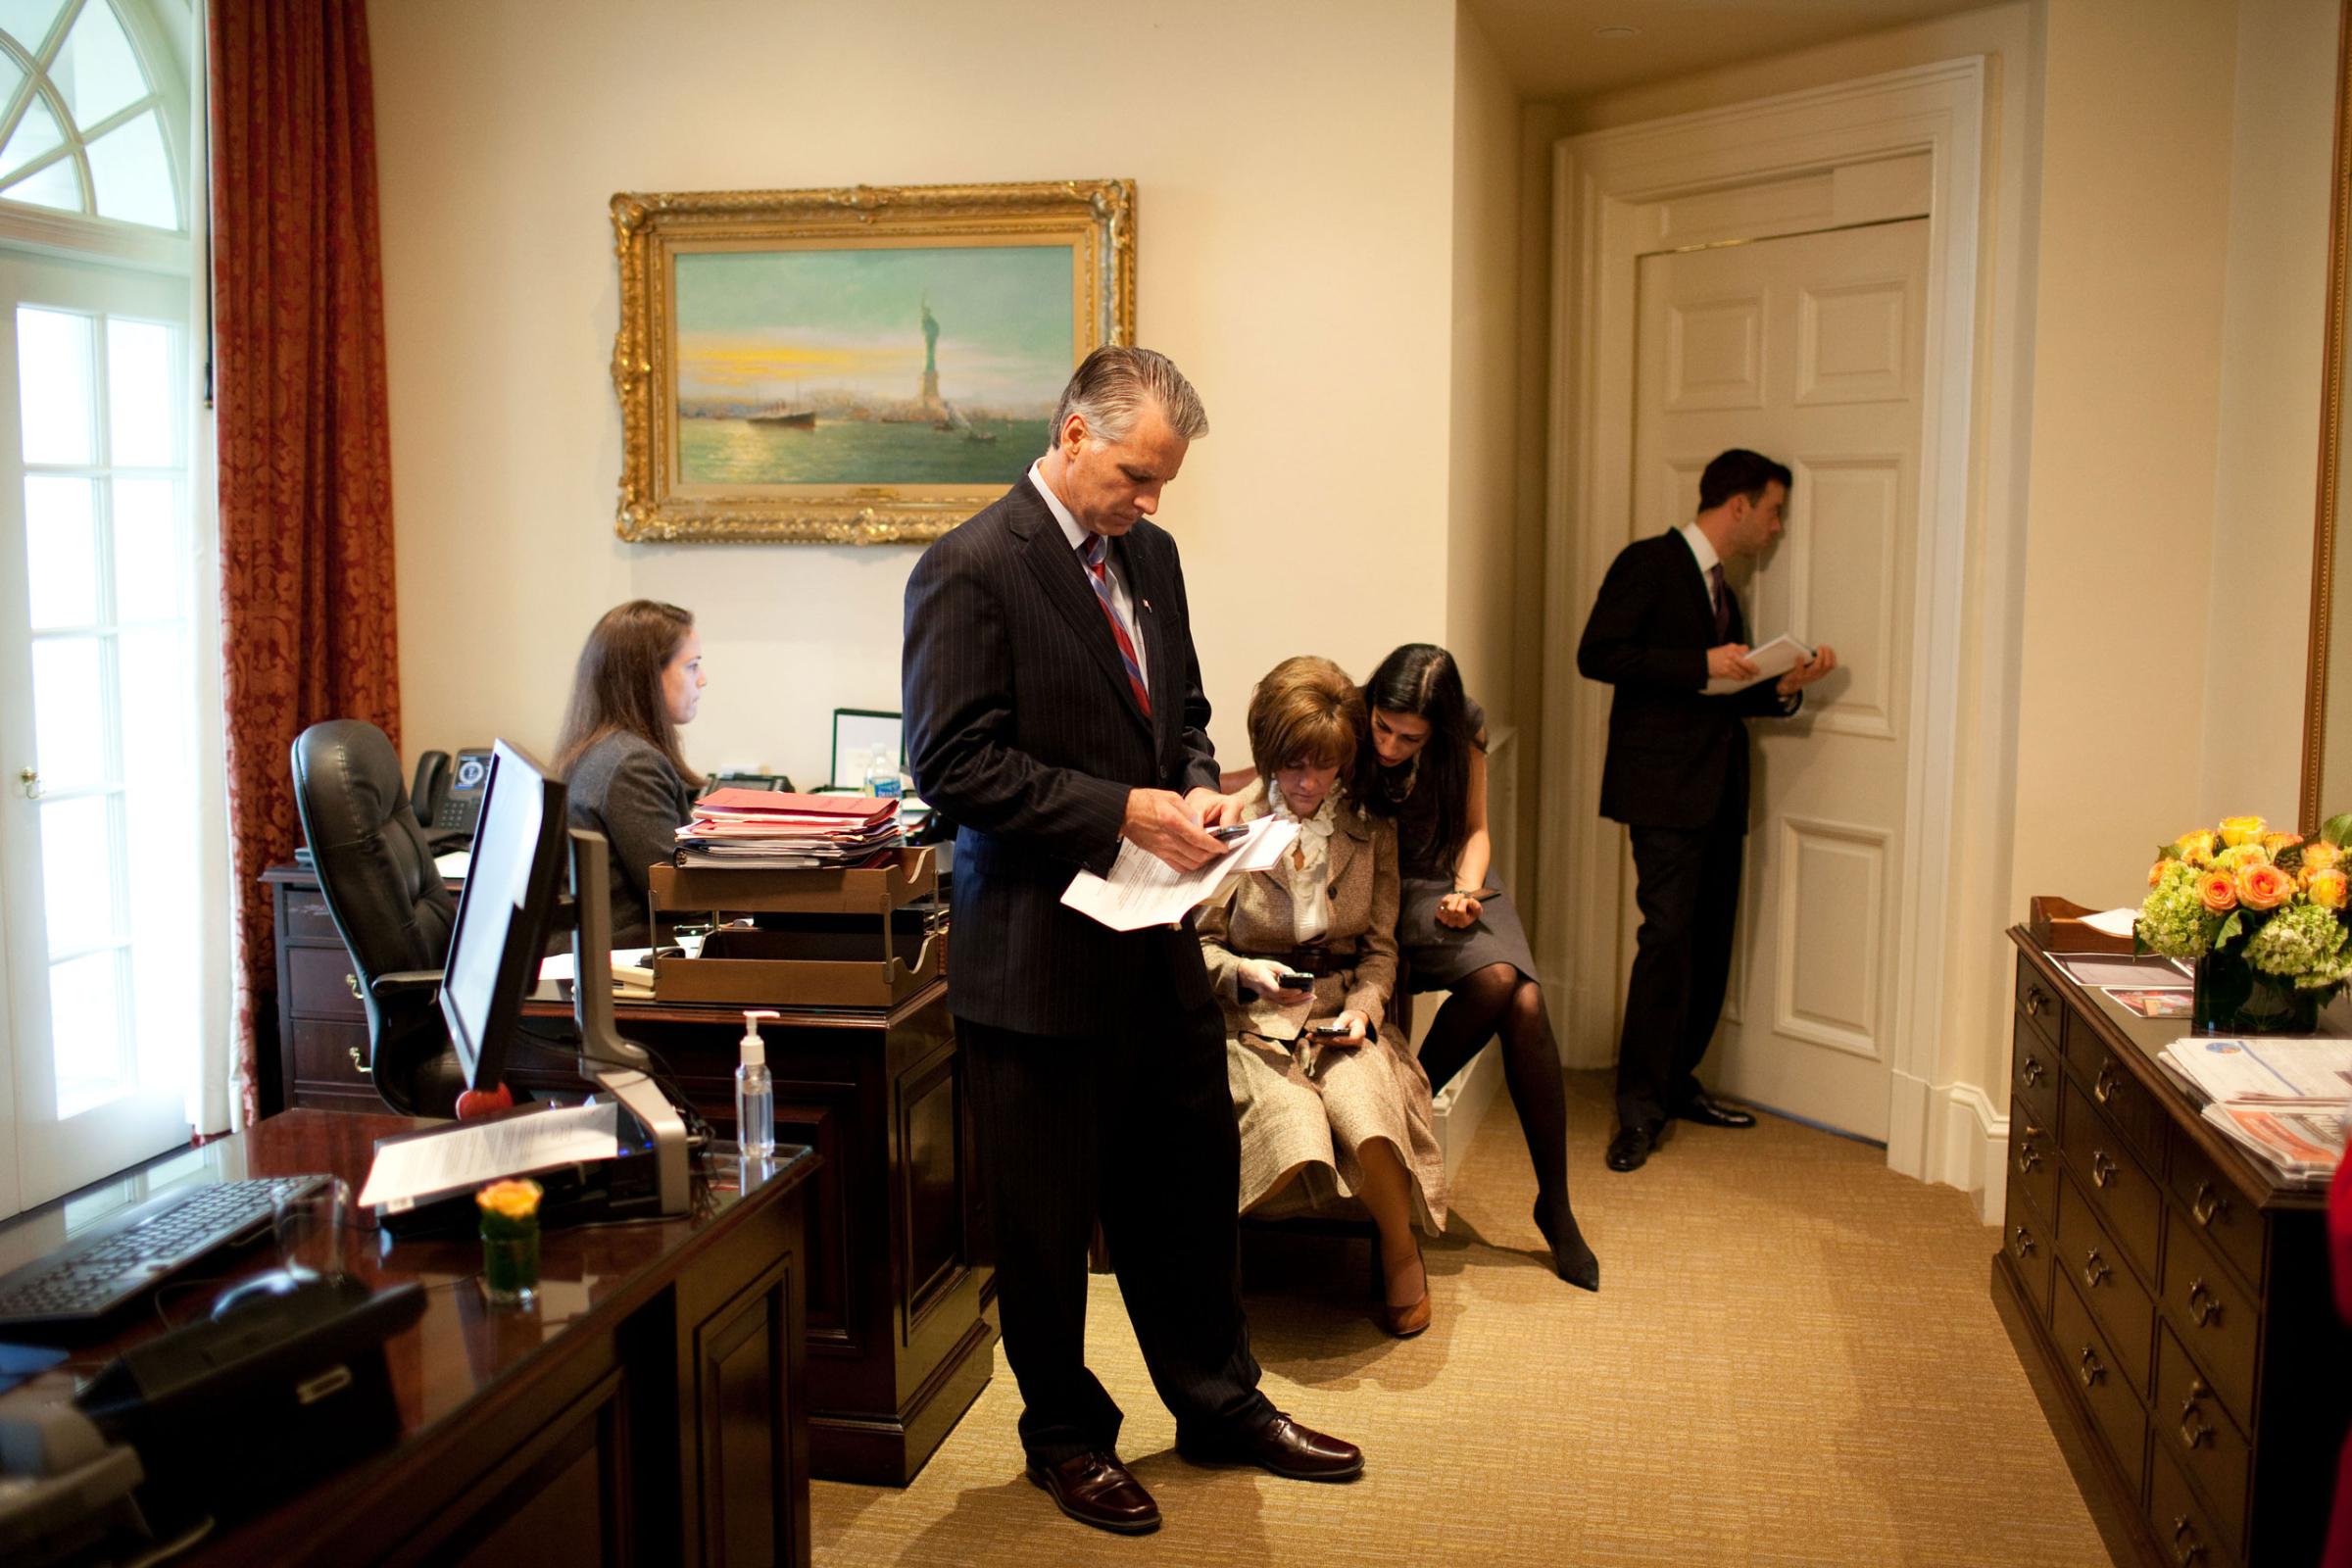 Brian Mosteller, deputy director of Oval Office operations, looks through a peephole in the Oval Office door to monitor the progress of the bilateral meeting between President Barack Obama and Prime Minister Manmohan Singh of India. Also pictured, from left, are Personal Secretary Katie Johnson, Chief of Protocol Capricia Marshall, Huma Abedin, advisor to Secretary of State Hillary Clinton, and U.S. Ambassador to India Timothy Roemer, Nov. 24, 2009.